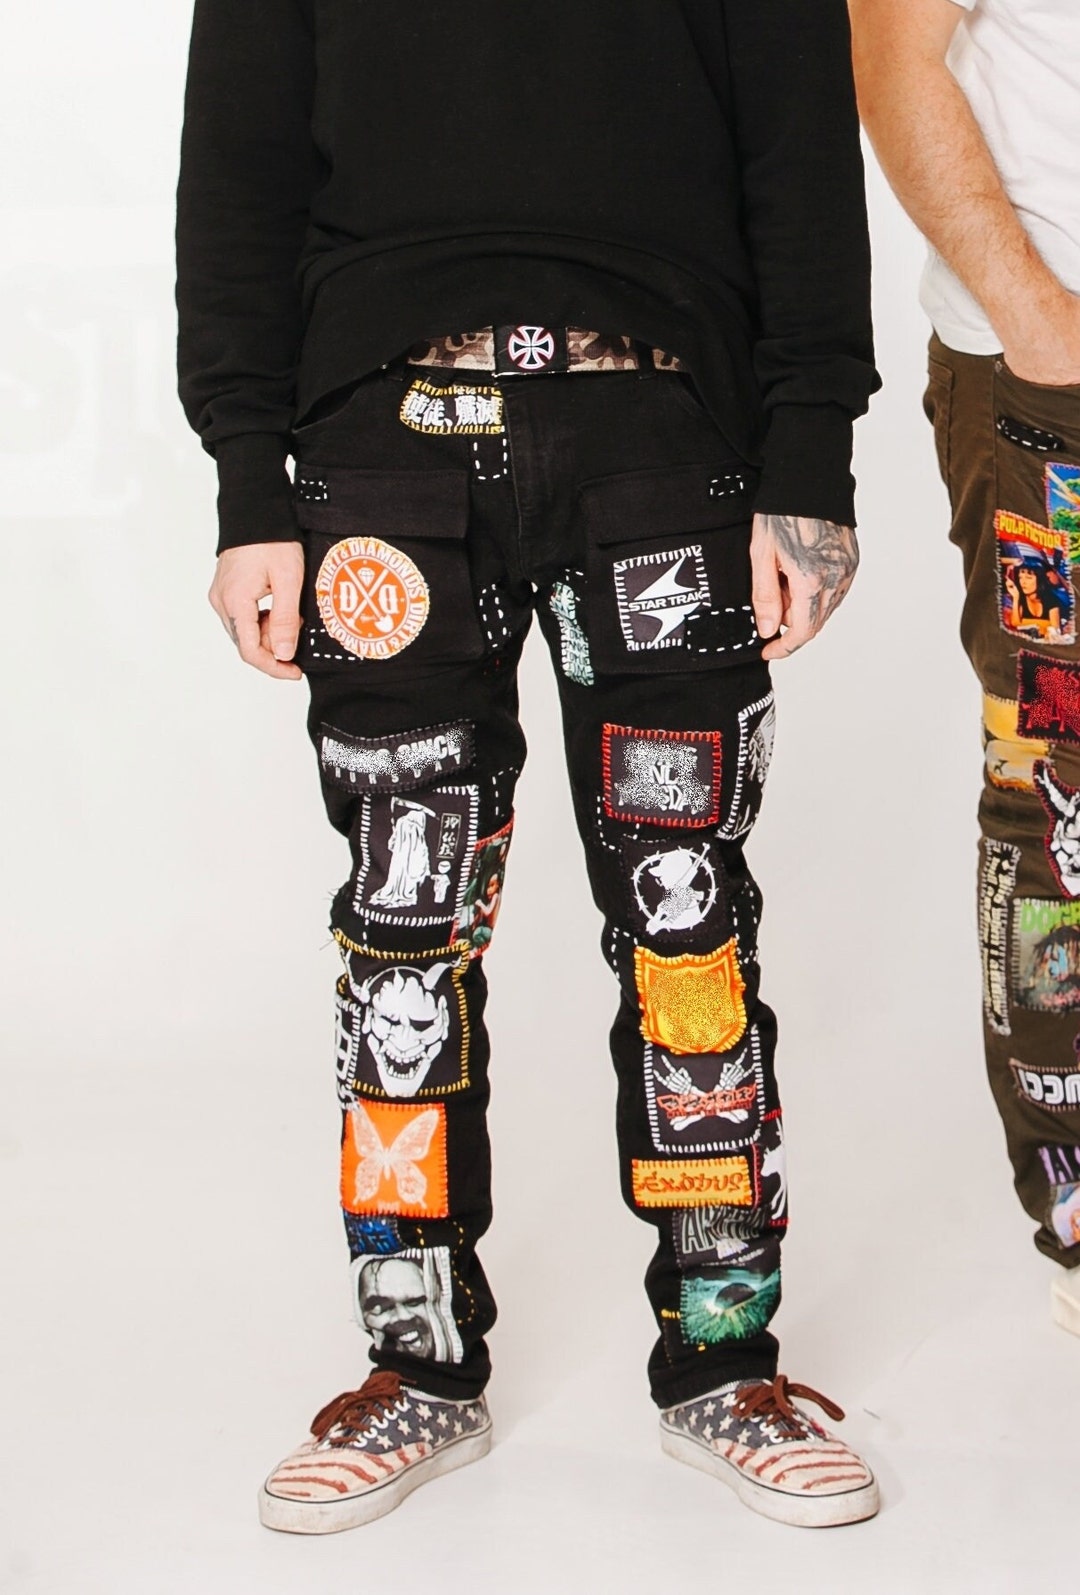 Missing Since Cargo Zillakami Pants Handmade Jeans Patchwork - Etsy